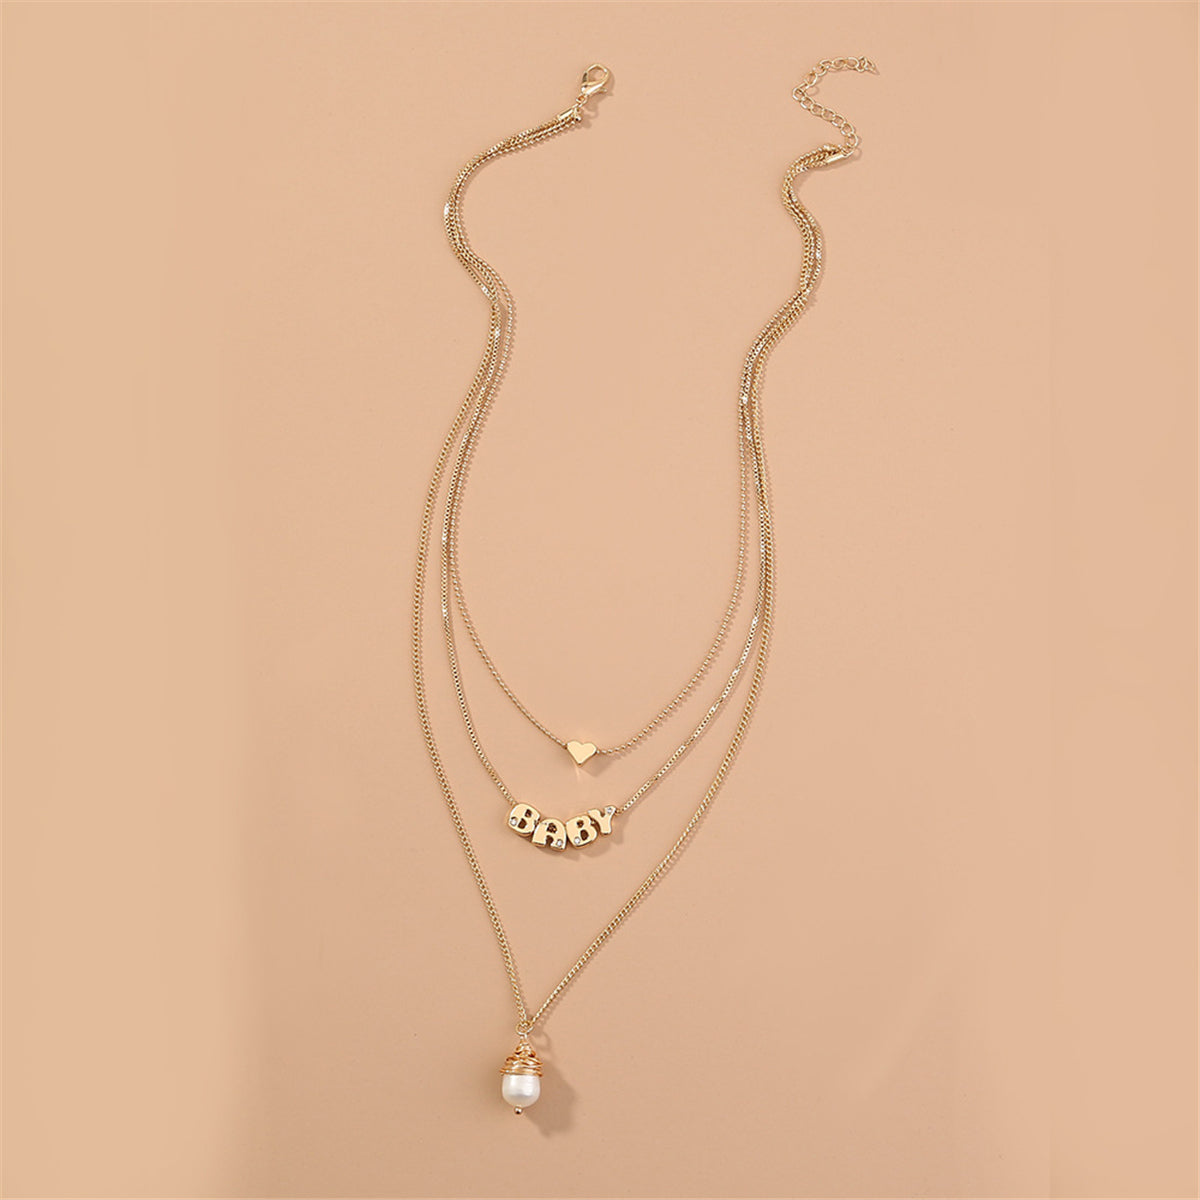 Pearl & Cubic Zirconia 'Baby' Layered Pendant Necklace